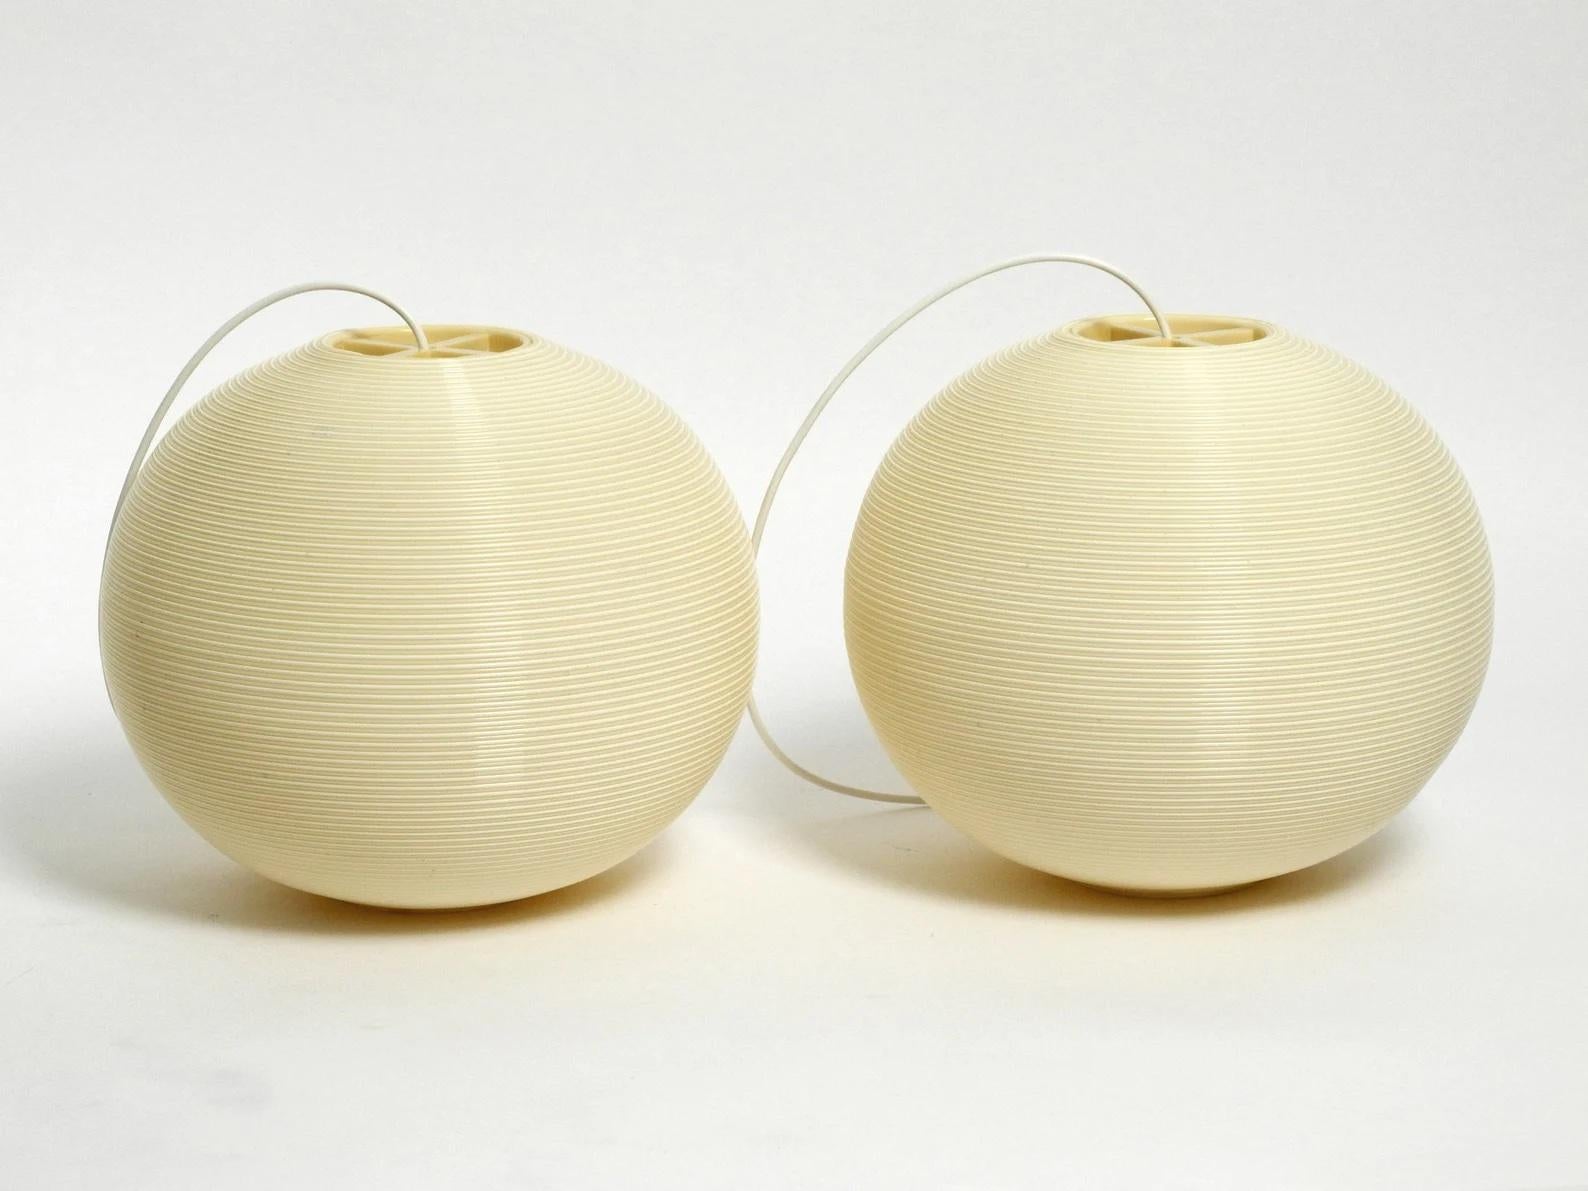 Pair of large original 1960s beige Heifetz Rotaflex pendant lamps. 
Great glare-free light for all living spaces. Very good original condition without damage. 
With original suspension and socket.
One E27 socket for enough light in each